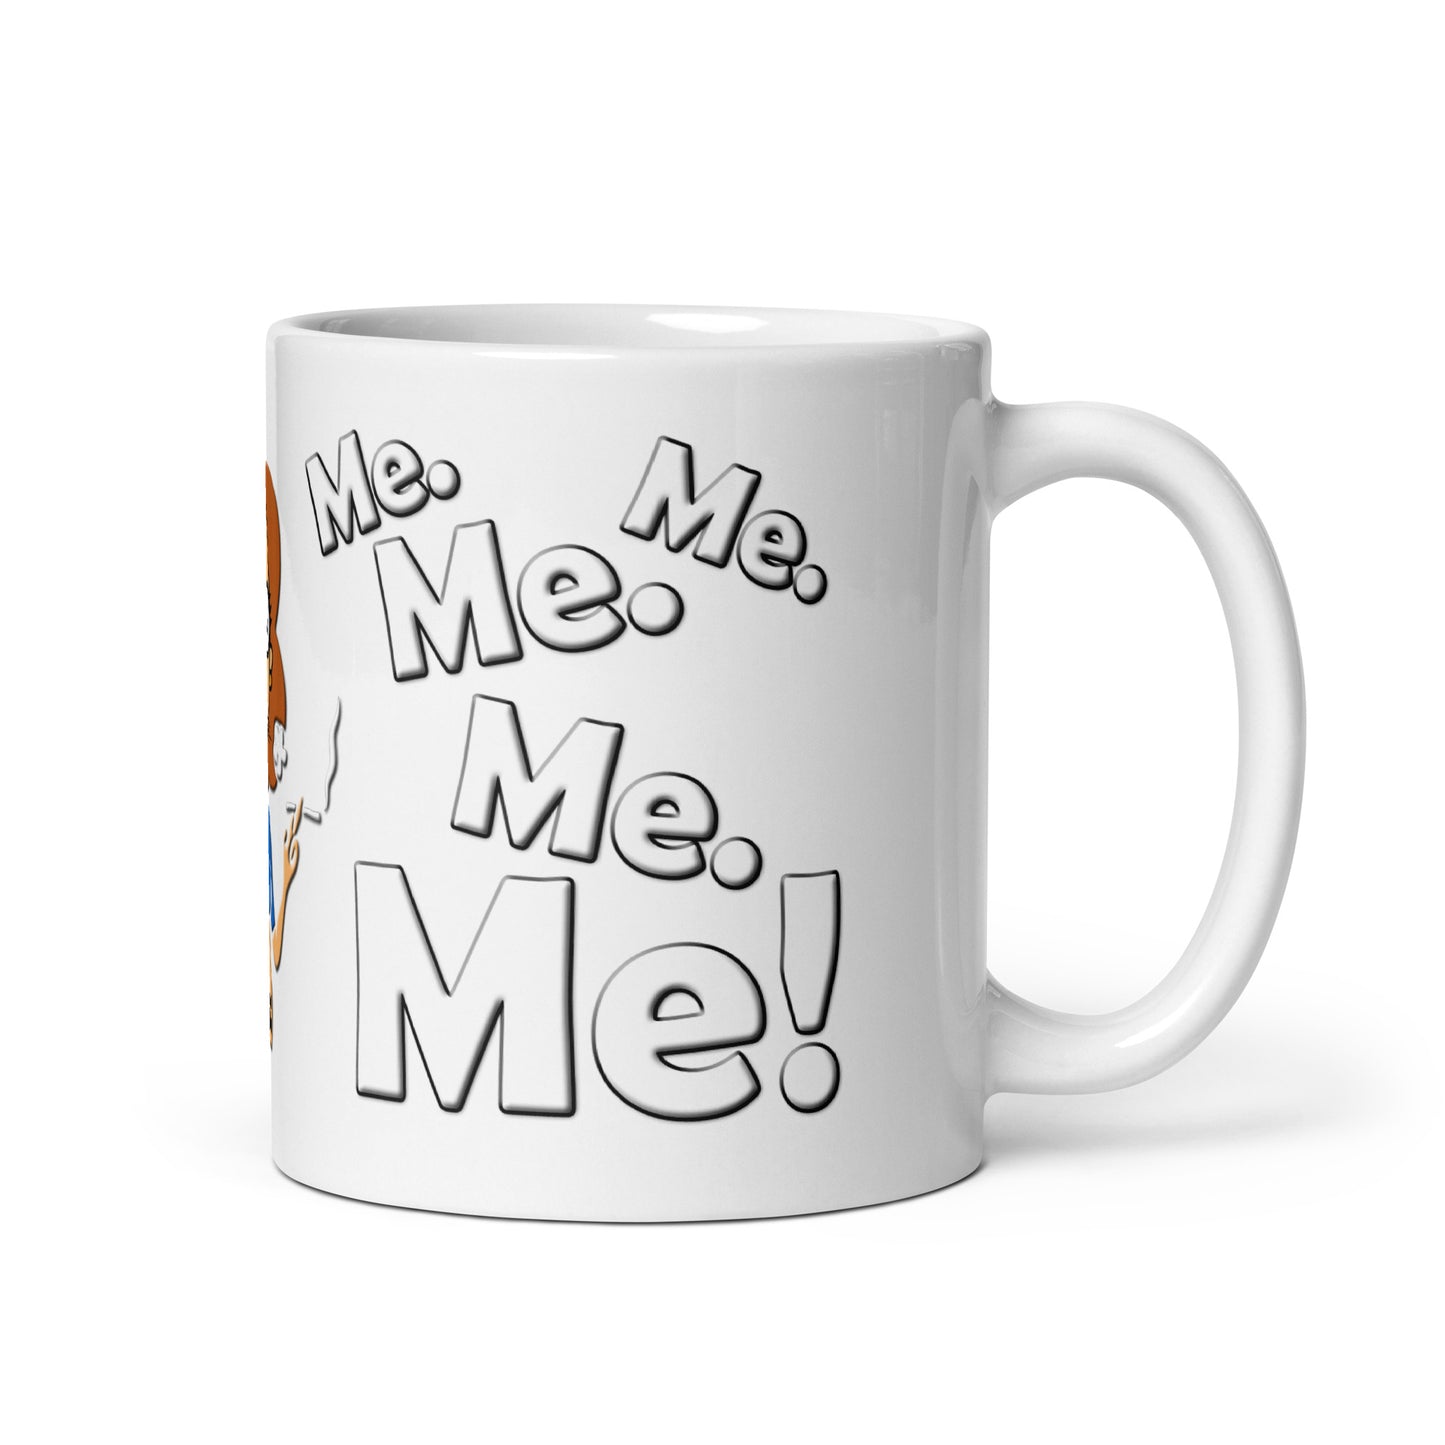 A015 Mug - White Glossy Ceramic Mug Featuring a Graphic of a Young Pregnant Woman Smoking, with the Text “I’m Pro-choice. I Only Care About Me. Me. Me. Me. Me!”